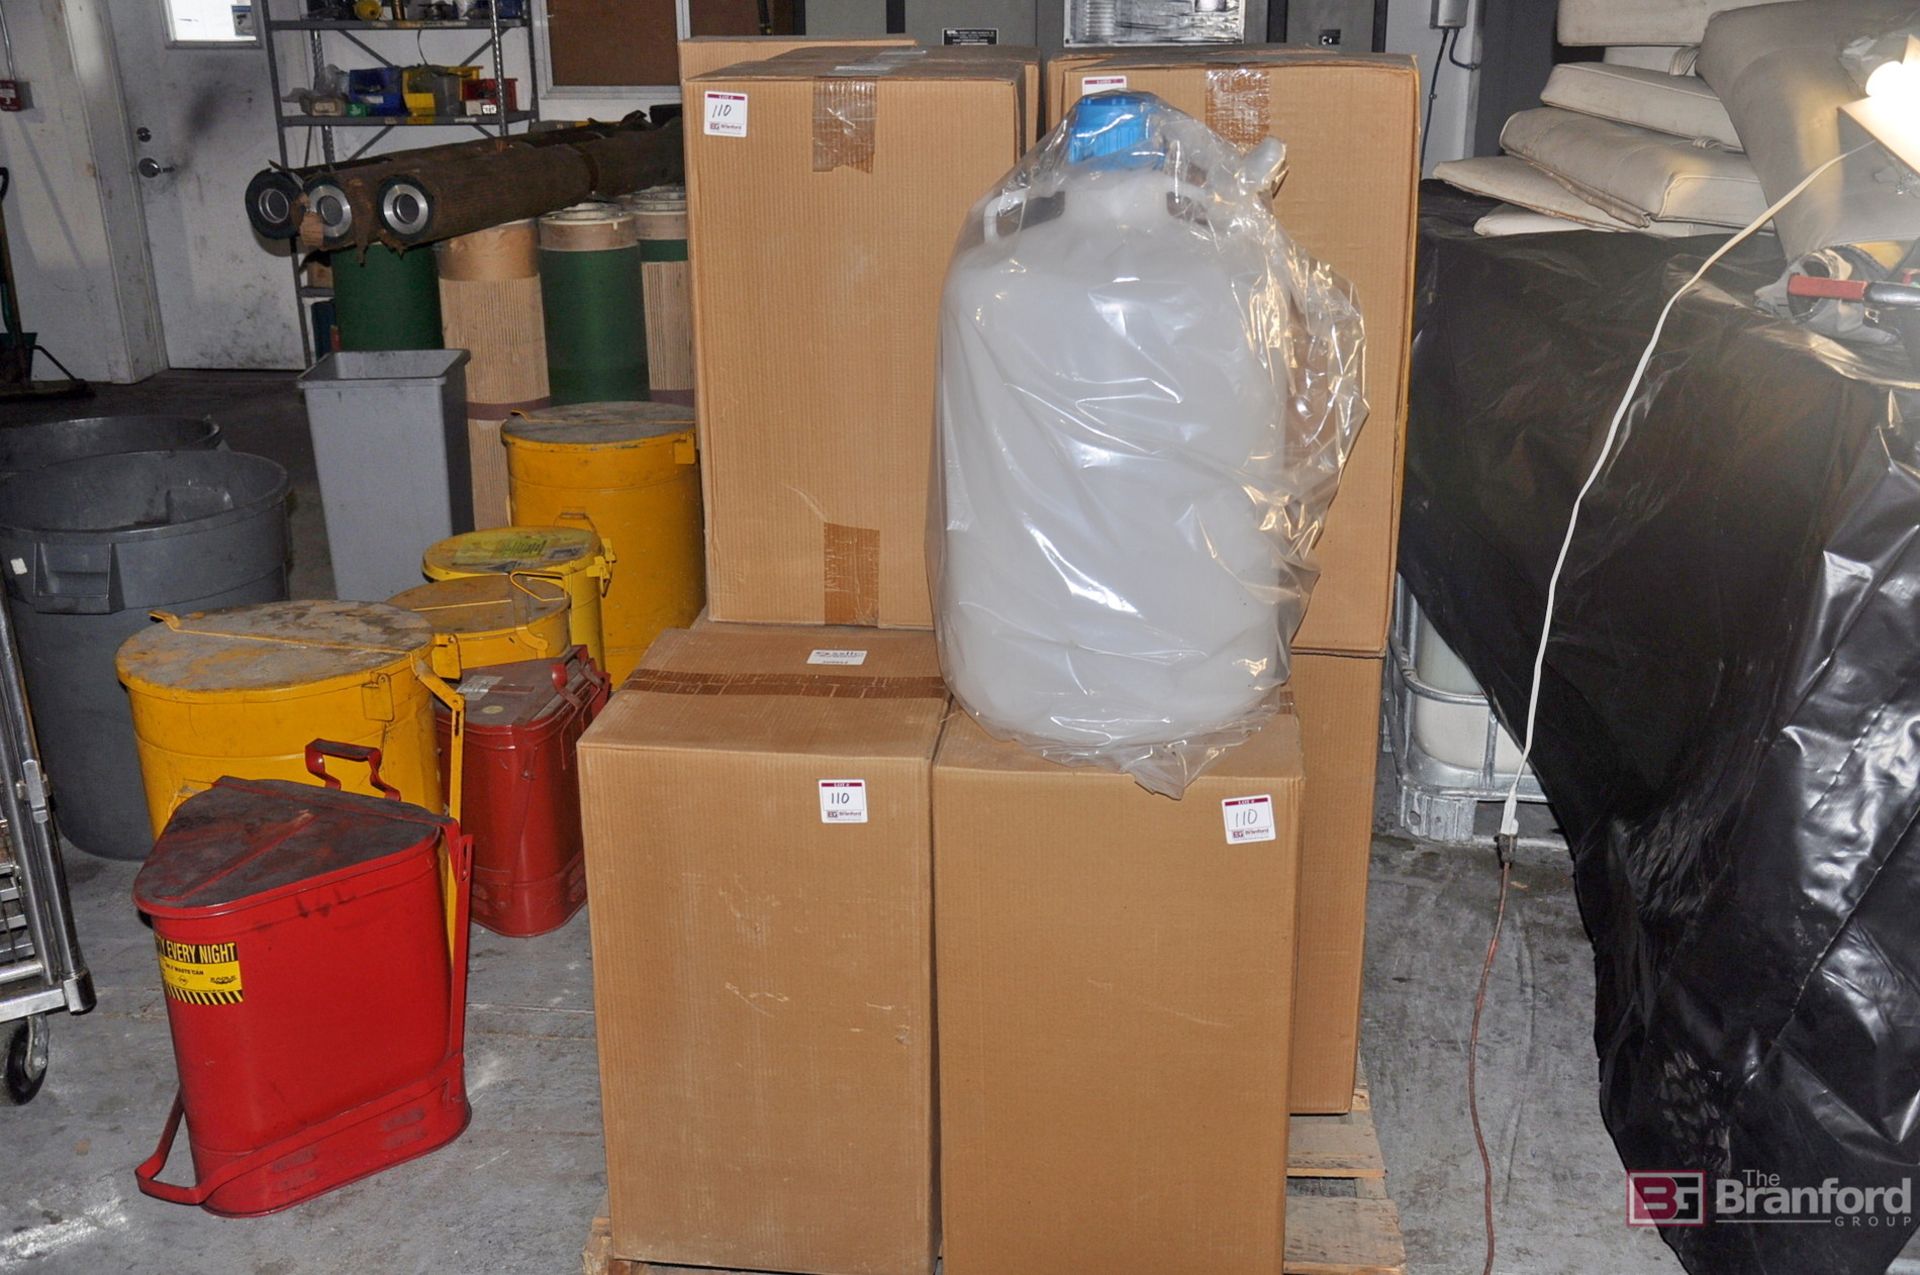 (13) LDPE 50L carboy